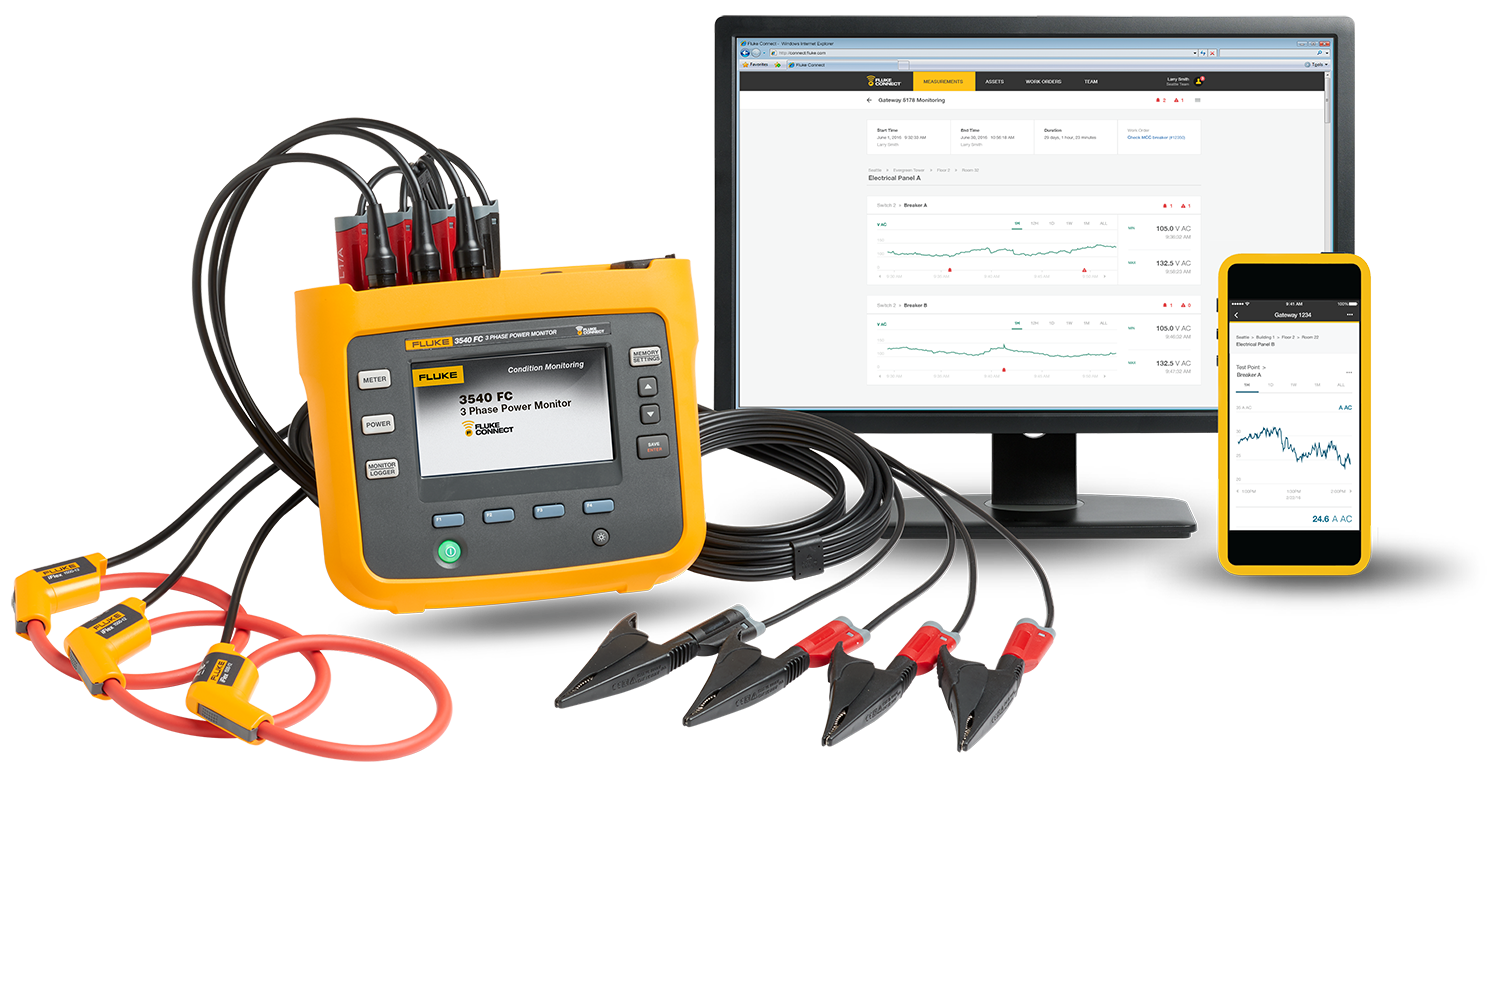 A Fluke 3540 FC Three-Phase Power Monitor and Fluke Connect software shown on smart device and desktop.